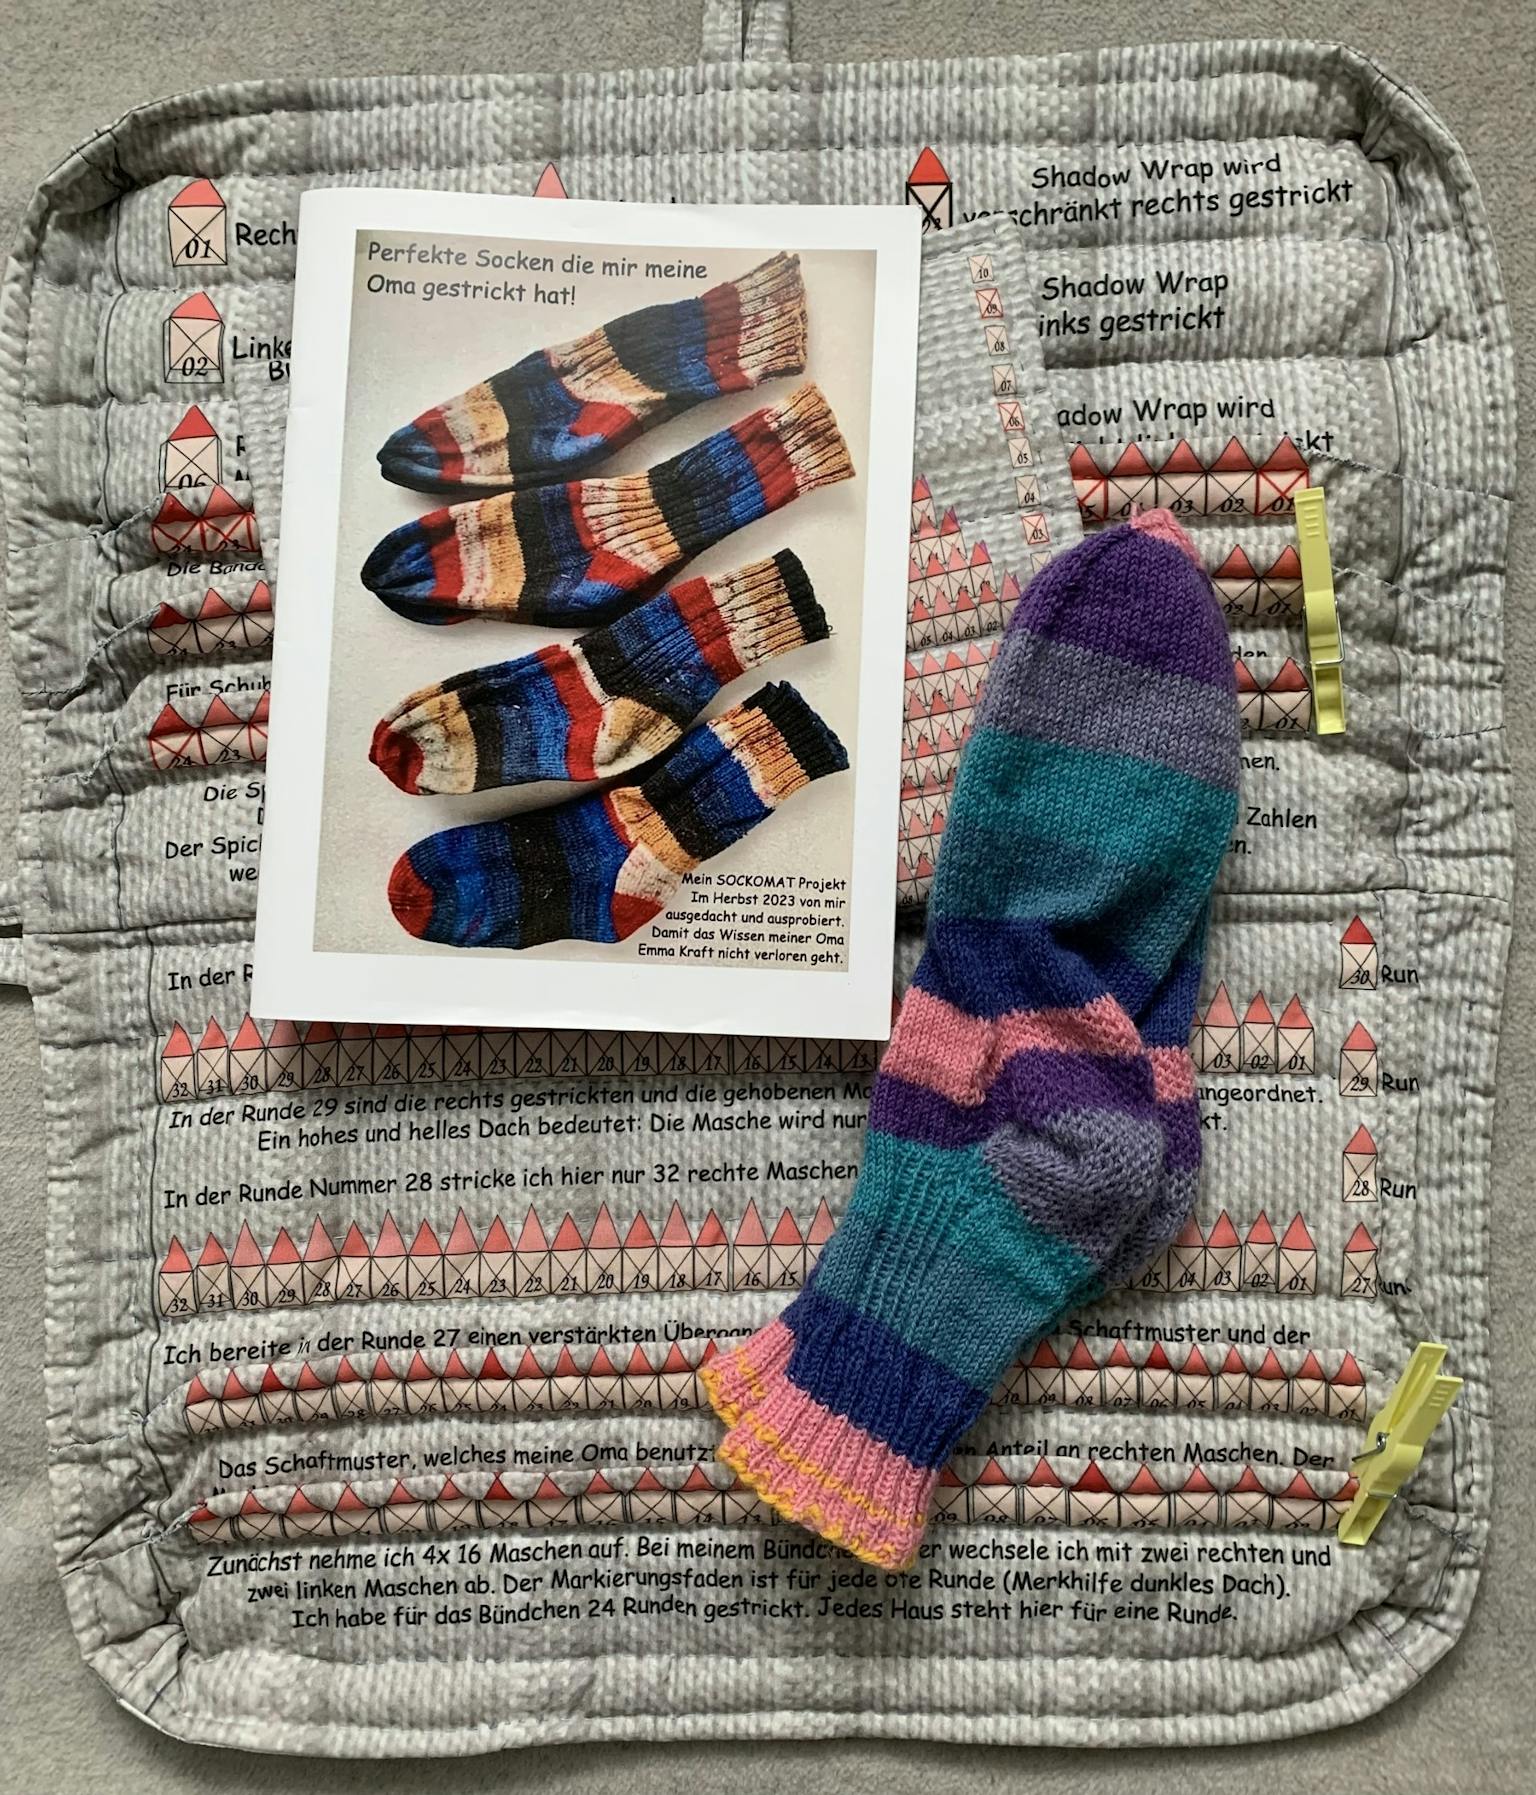 Image for entry 'Sockomat - My grandmother Emma Kraft's knowledge of sock knitting has been preserved for future generations.'